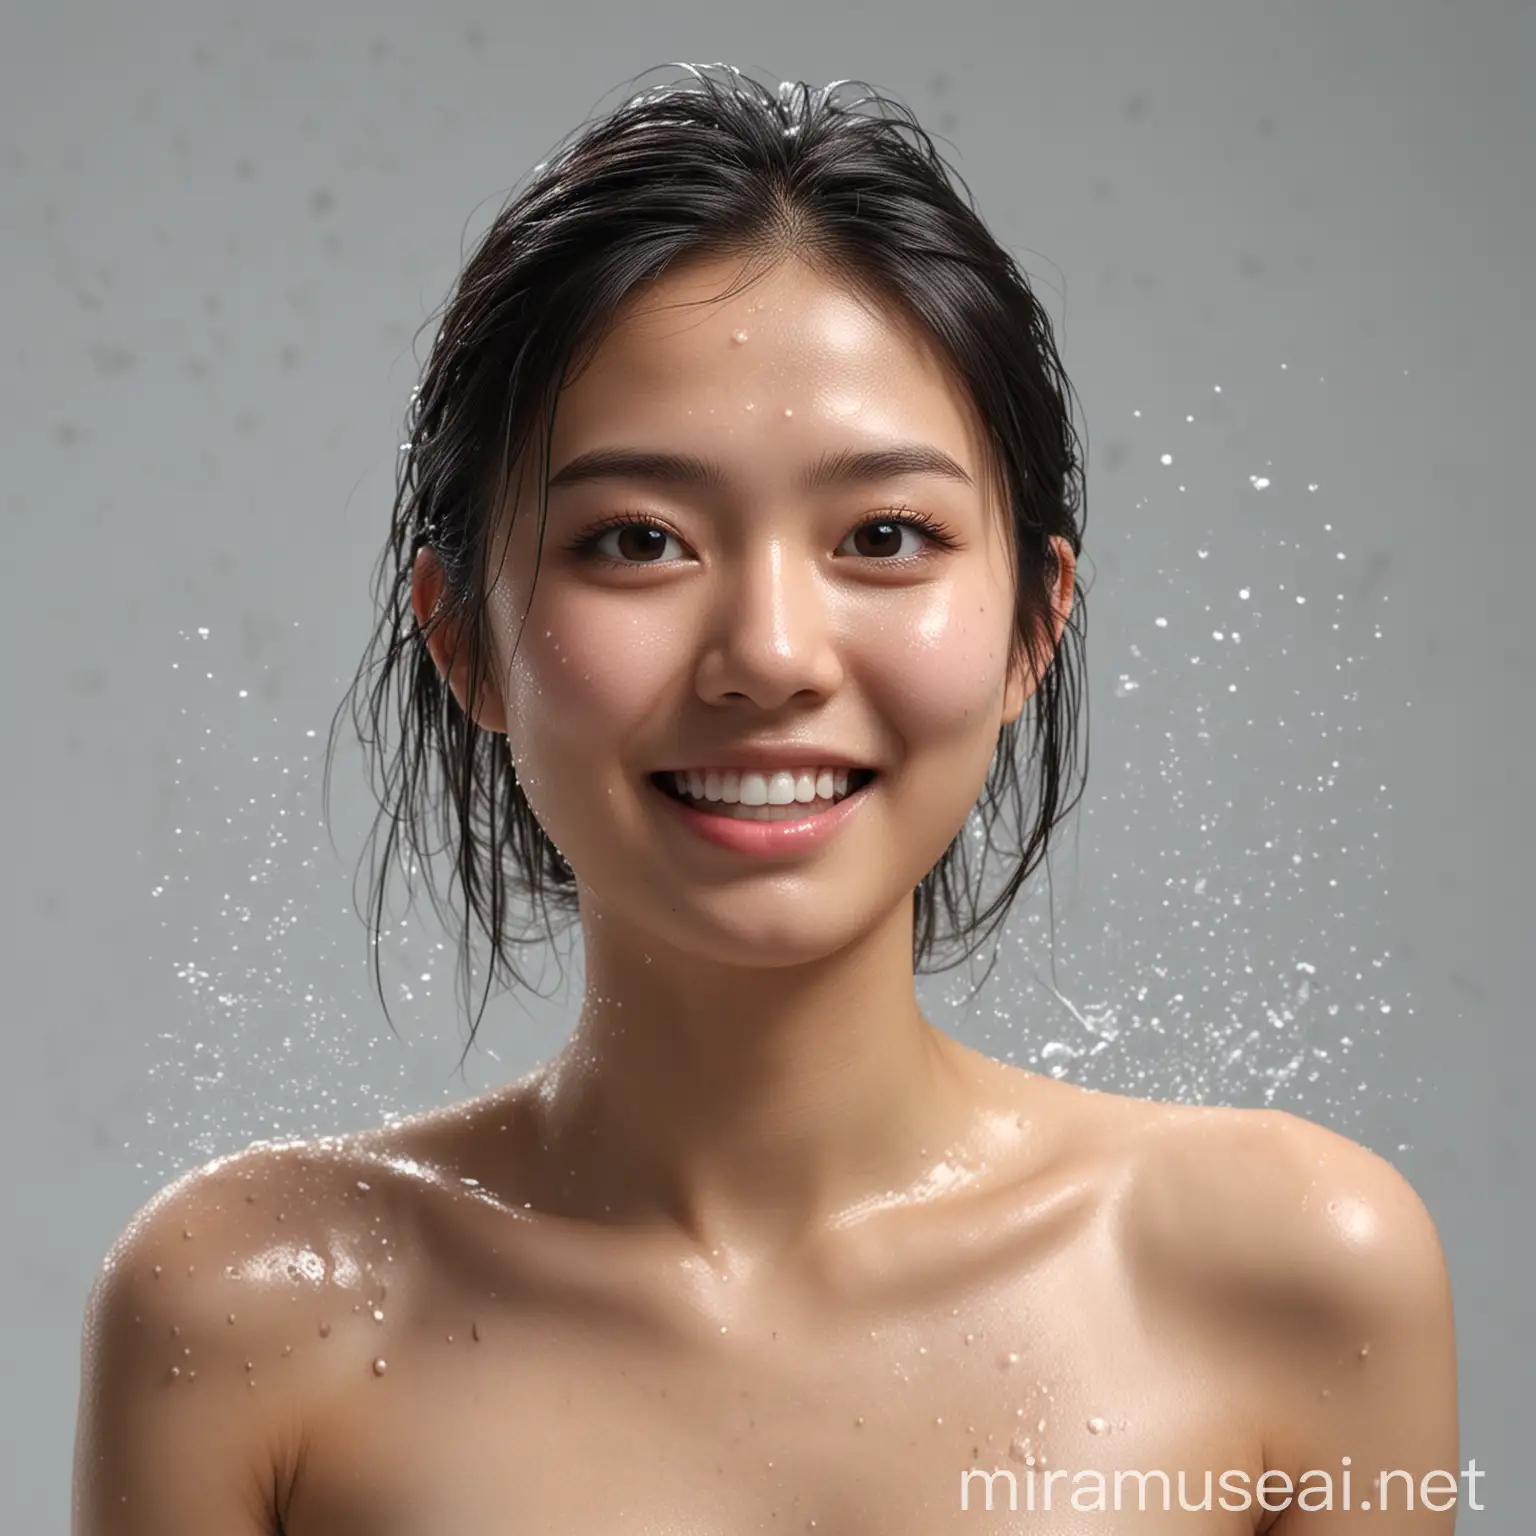 hyper realistic a beautiful young Taiwanese girl, 21 year old, soaked with Bath water, Wash her hair using shampoo, She smiles curiously, Looking Up View and the other hand protects the stomach. standing full body, High quality photo-realistic HD.Lens diameter: 84 mm Image format: RAW, Lighting: Soft lighting and Studio light, White balance: Auto (WB auto), Focus: Super focus, Exposure: Auto (ISO auto), Aperture: Original Photo (for maximum detail), Zoom out (for good zoom optics) Depth of Field: Masterpiece (to create depth of field and focus details).

